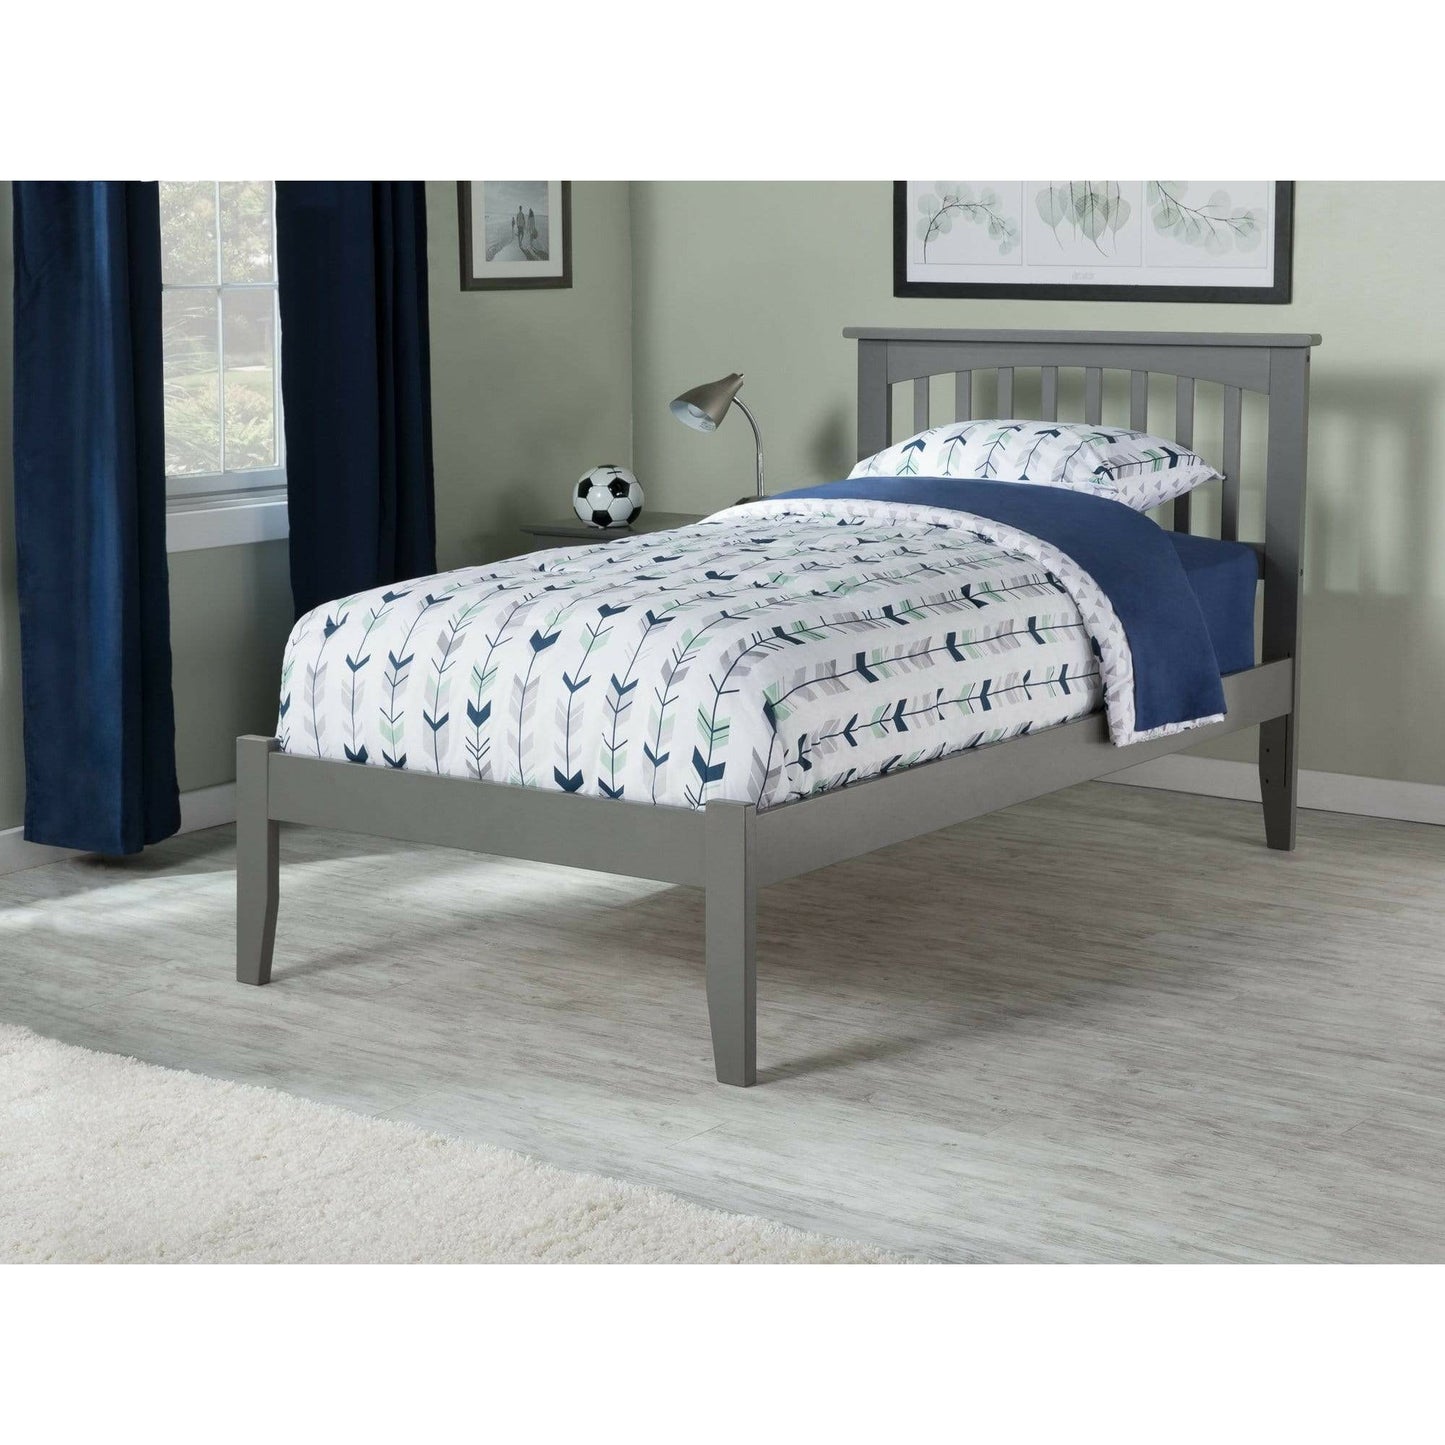 Atlantic Furniture Bed grey Mission Twin Platform Bed with Open Foot Board in Espresso